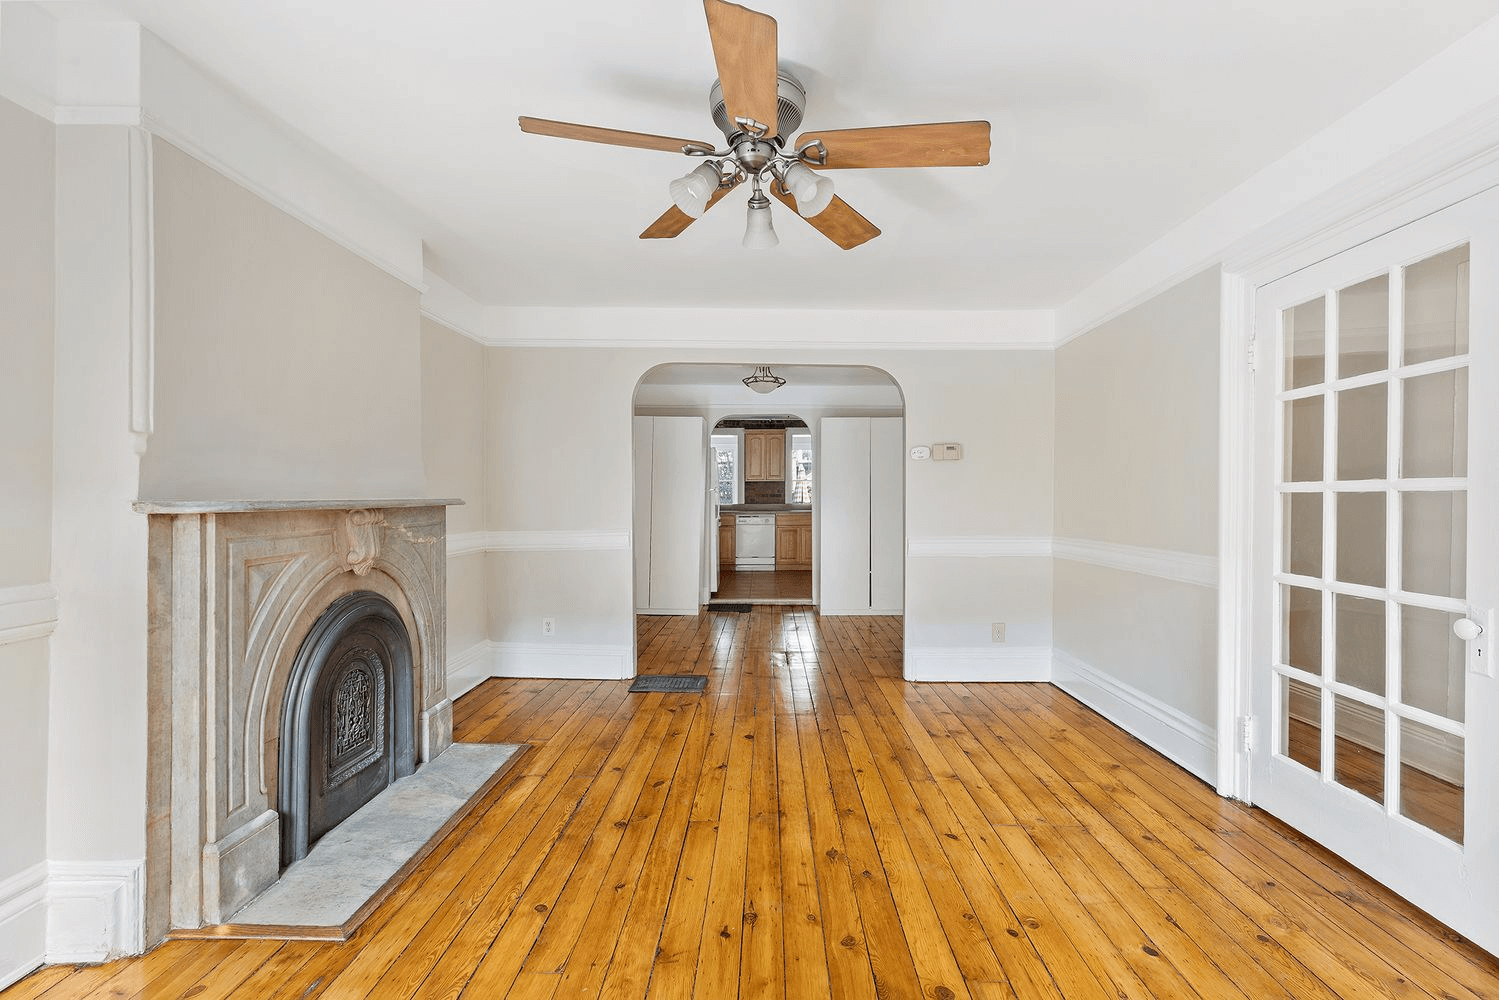 living room with ceiling fan and mantel